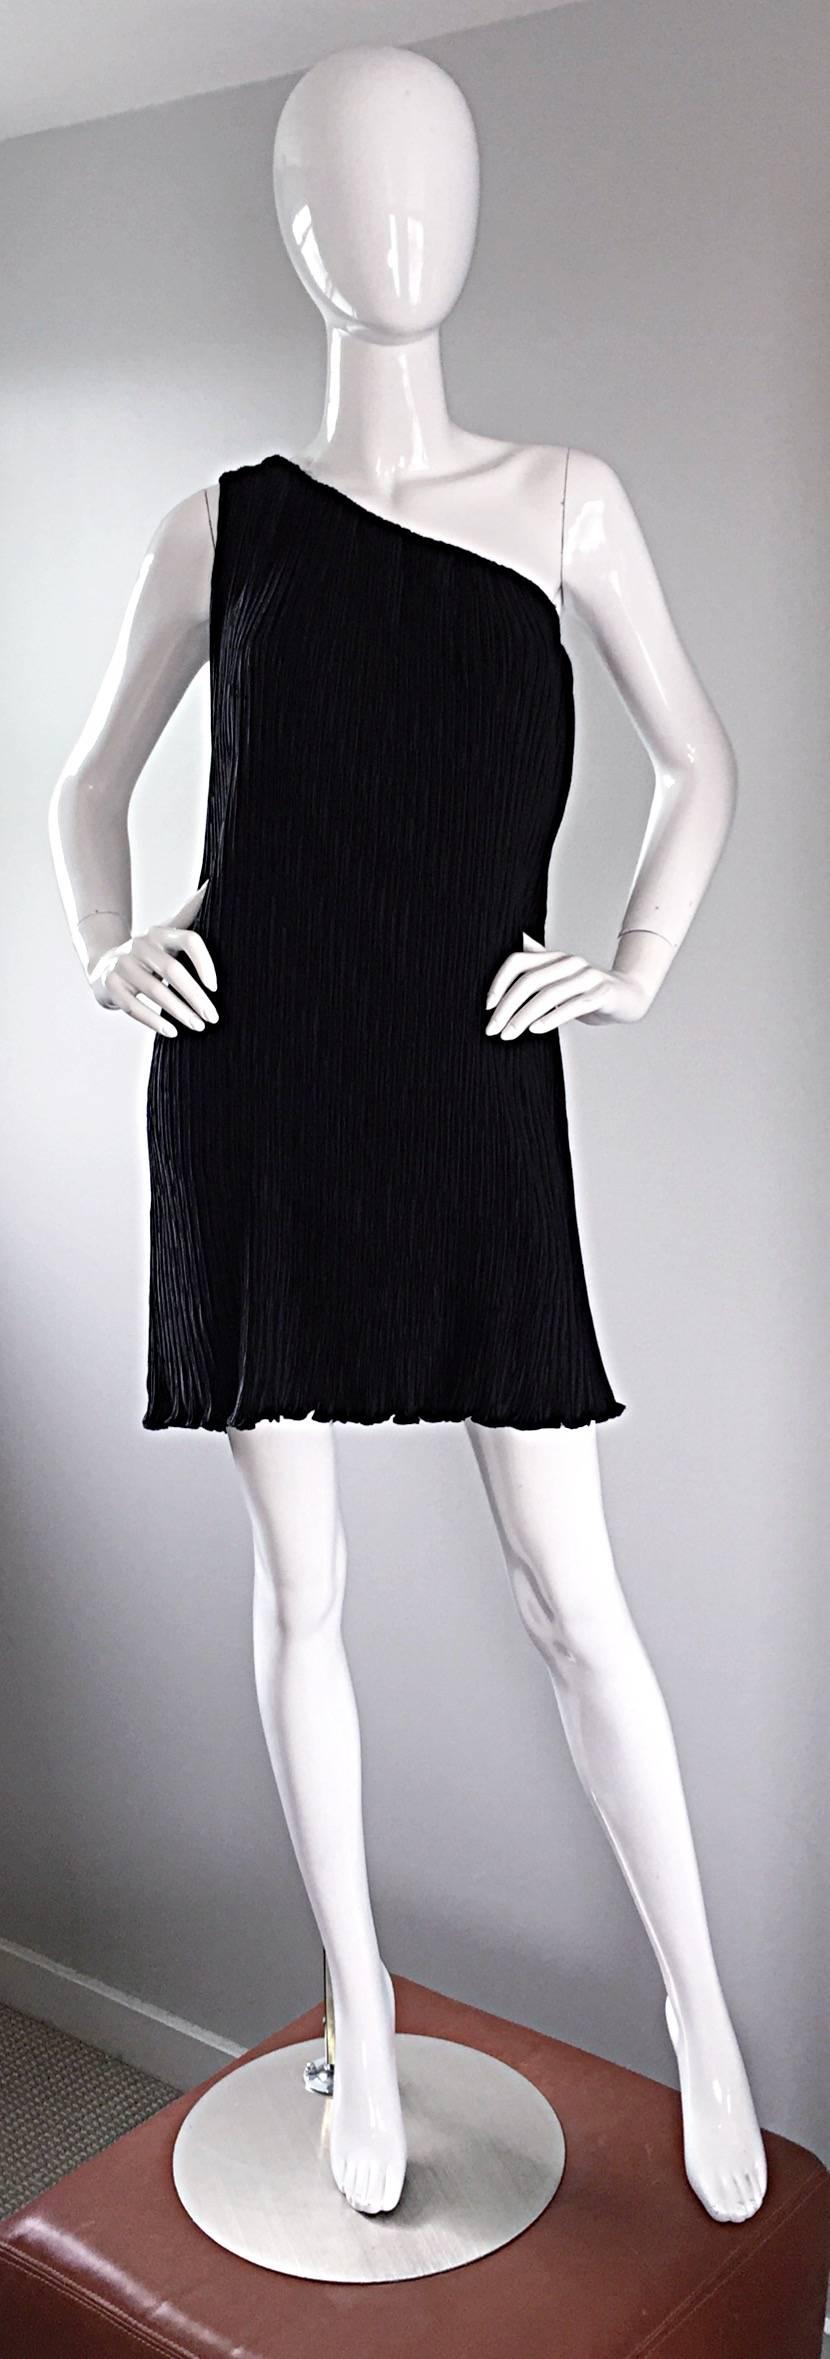 Beautiful vintage MARY MCFADDEN fortuny pleated black one-shoulder dress! Signature silk fortuny pleats that McFadden is renowned at working with! Such a flattering little black dress, that can easily transition from a day to night event. Hidden